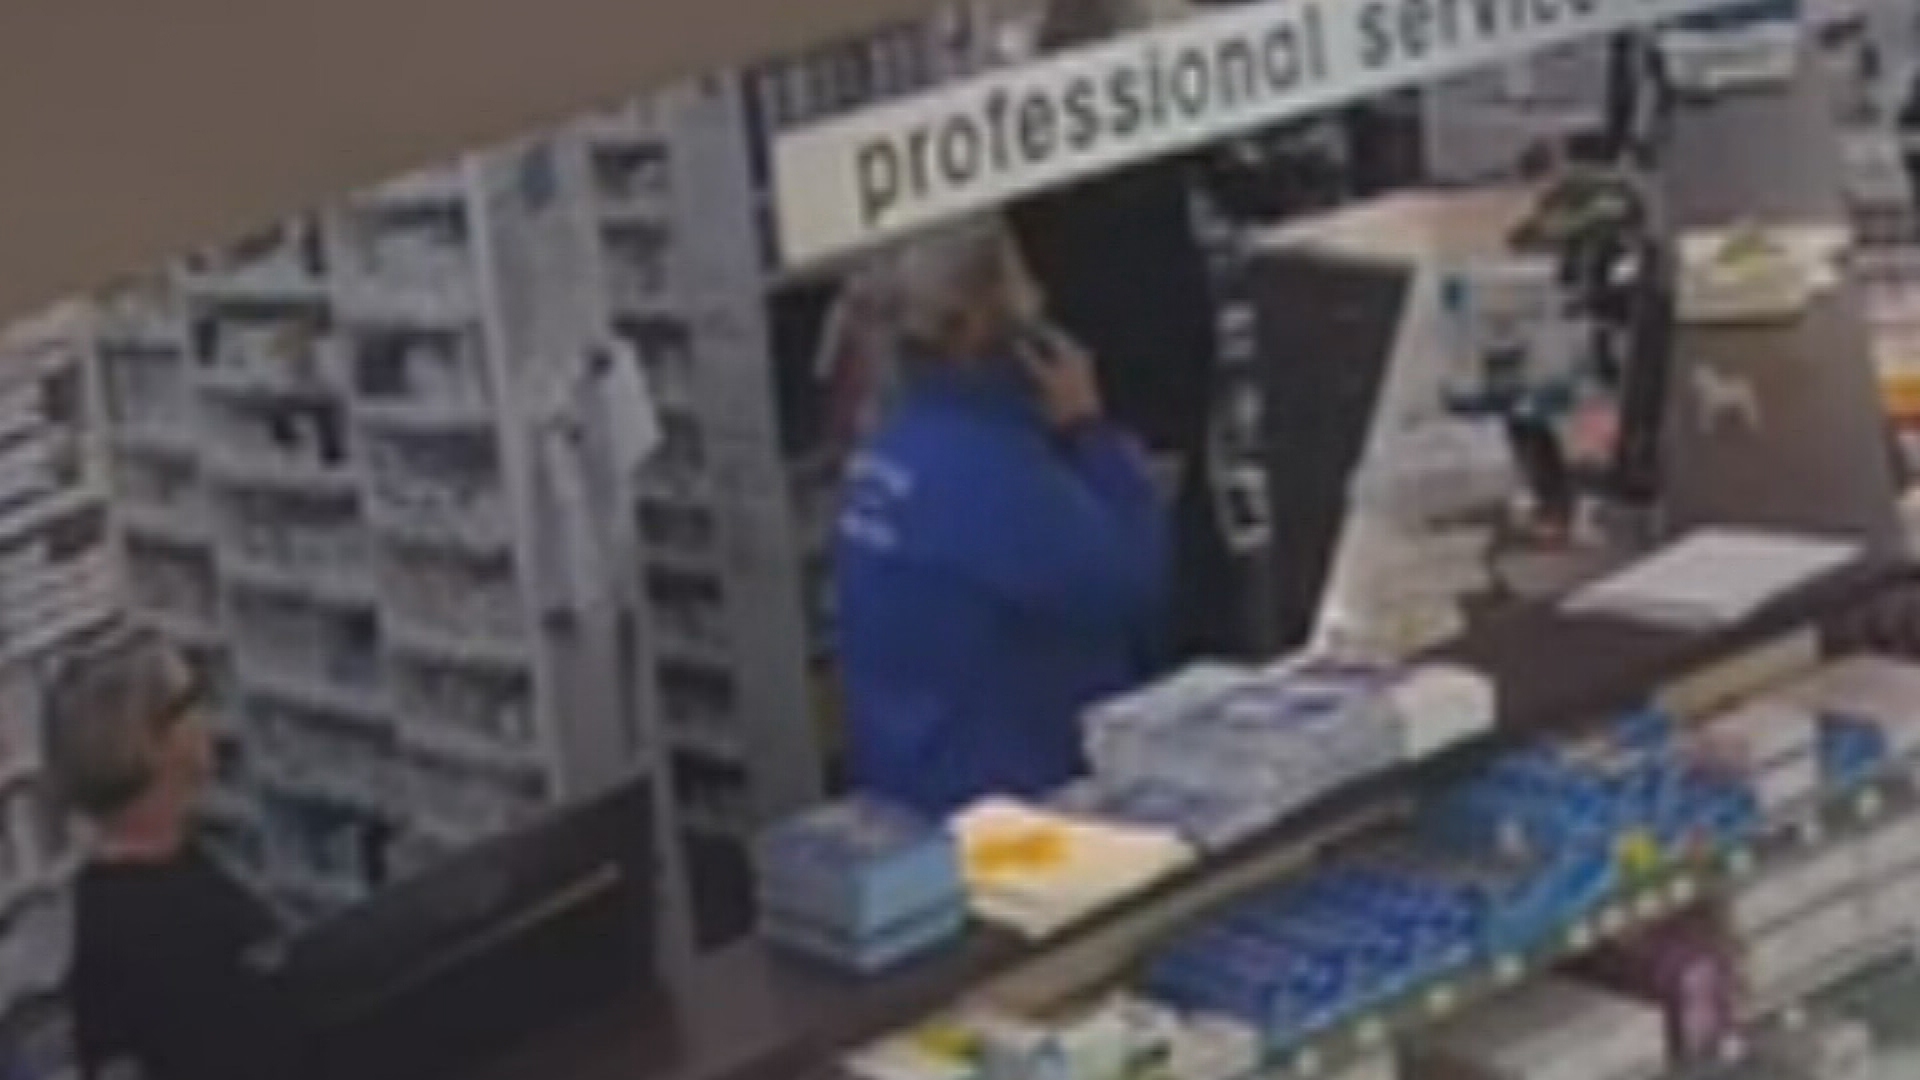 CCTV footage shows the moment a man allegedly attacked customers in the store, before he was arrested by police.﻿